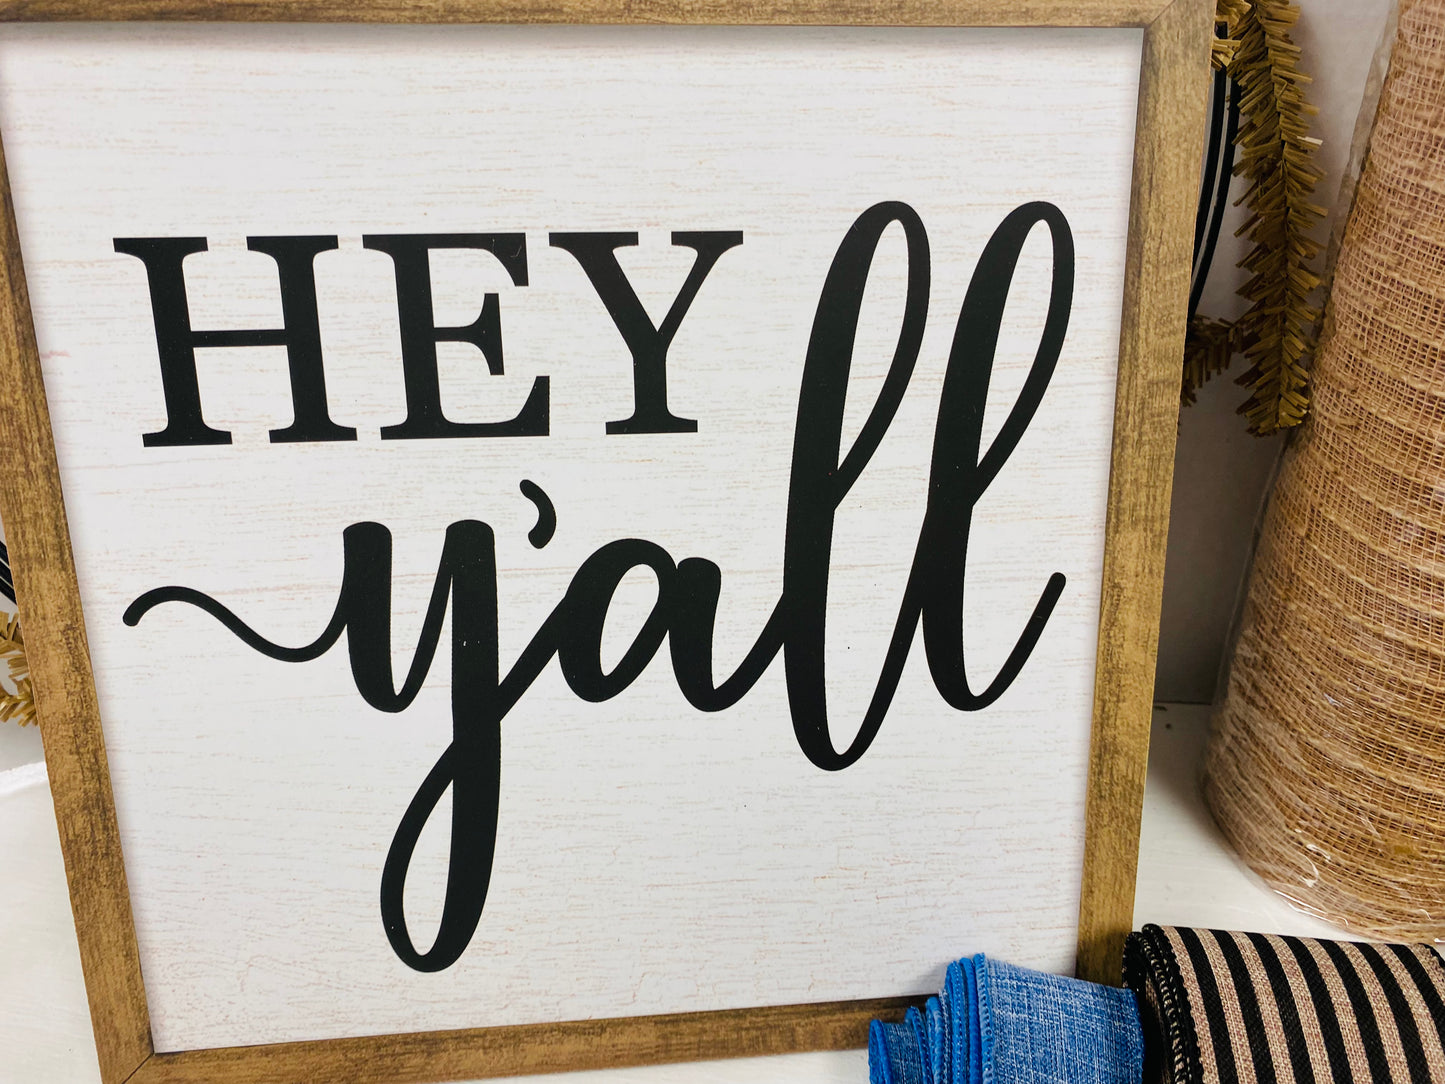 Party Kit - Hey Y'all Wreath